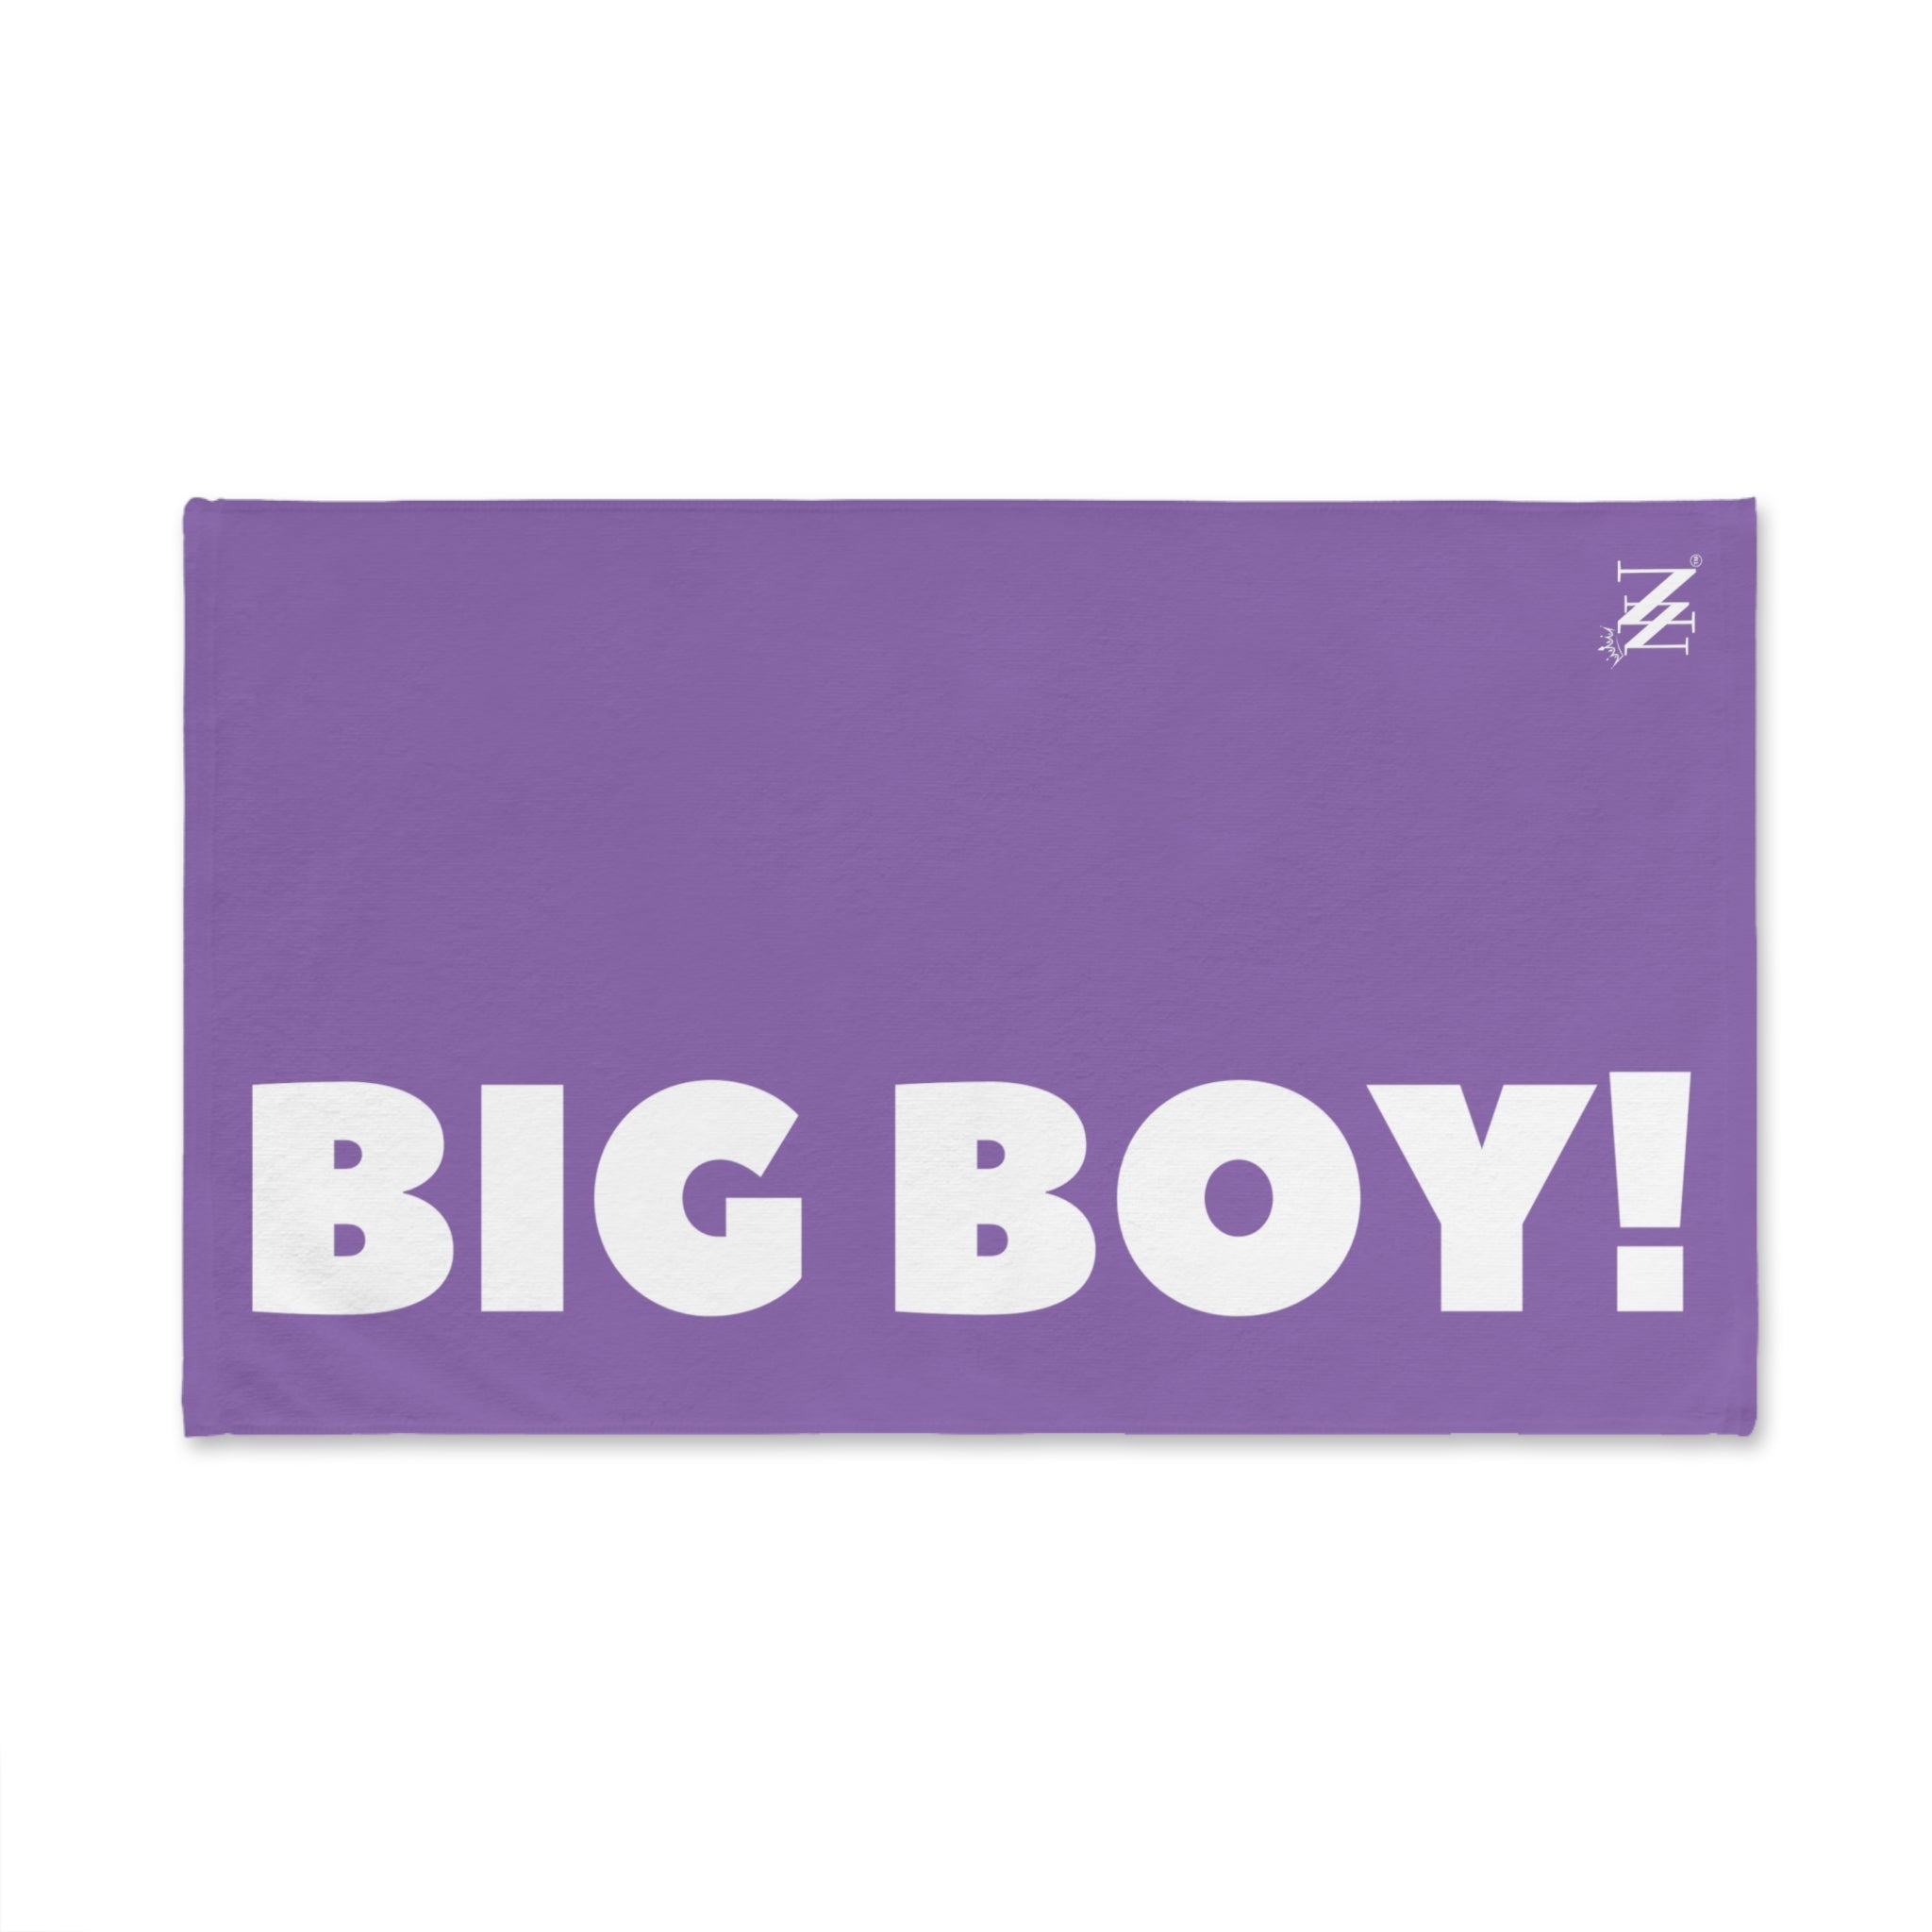 Big Boy Man Lavendar | Funny Gifts for Men - Gifts for Him - Birthday Gifts for Men, Him, Husband, Boyfriend, New Couple Gifts, Fathers & Valentines Day Gifts, Hand Towels Valentines NECTAR NAPKINS